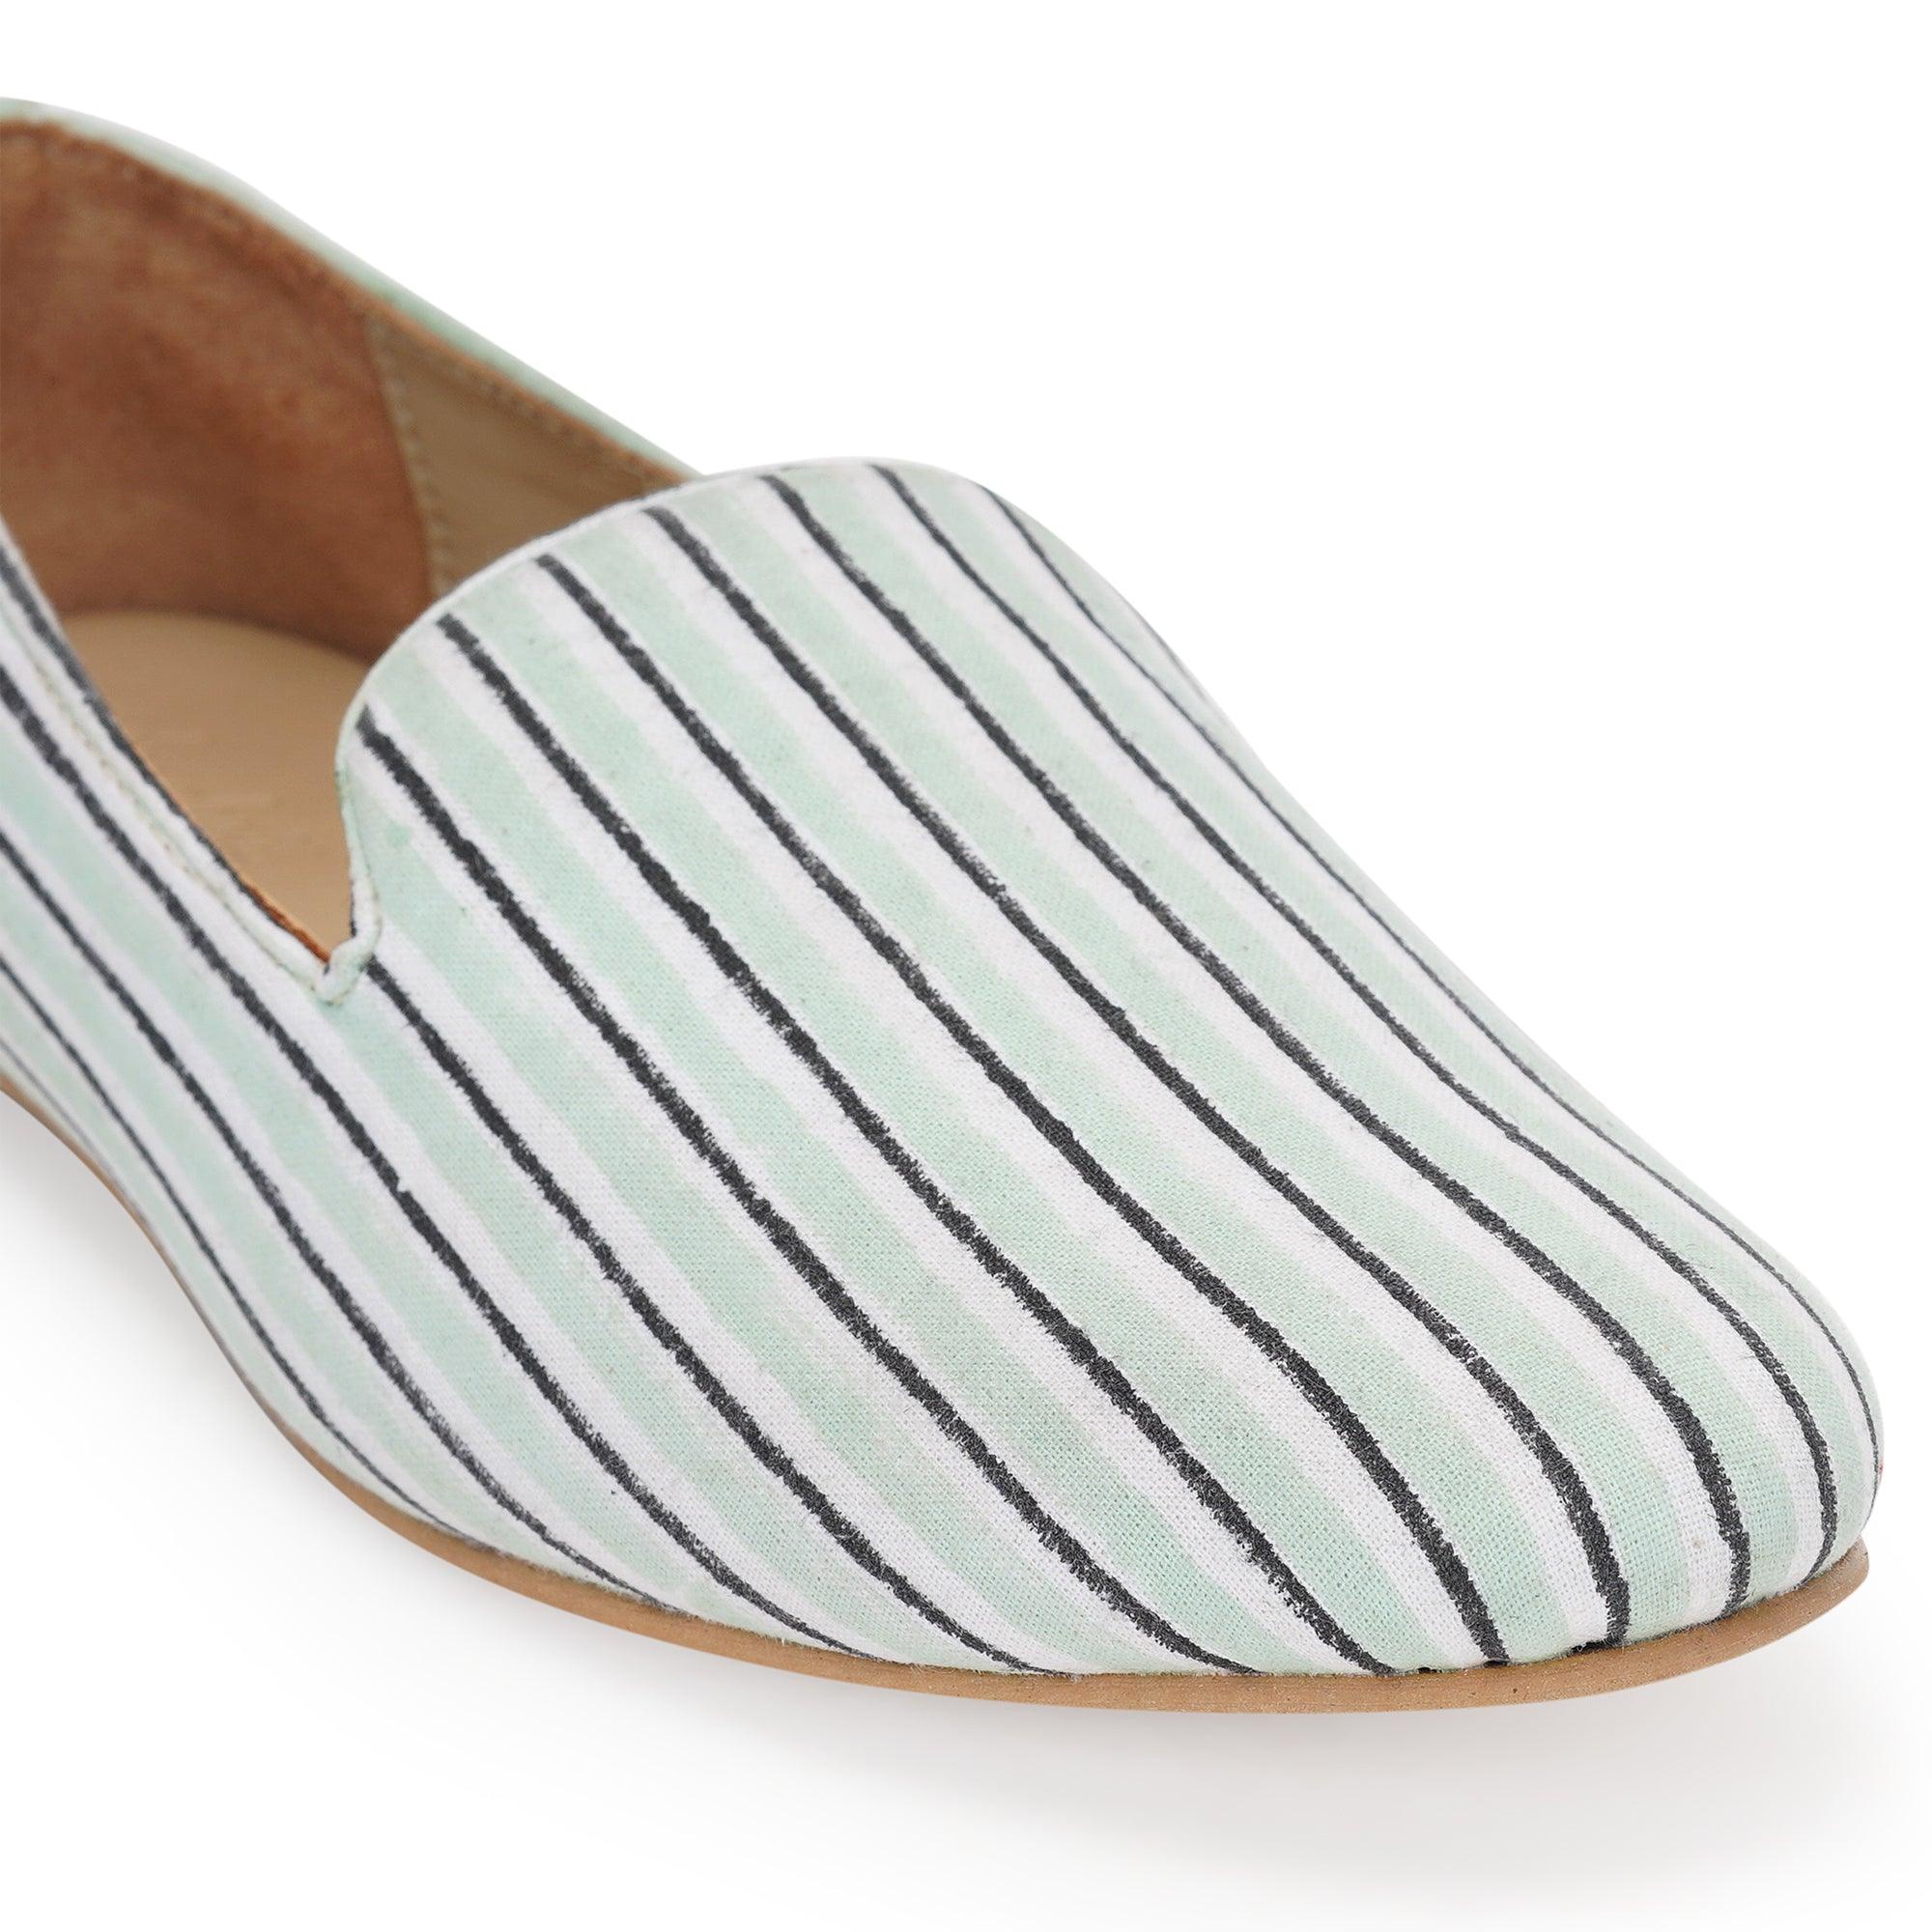 Sorrento Loafers